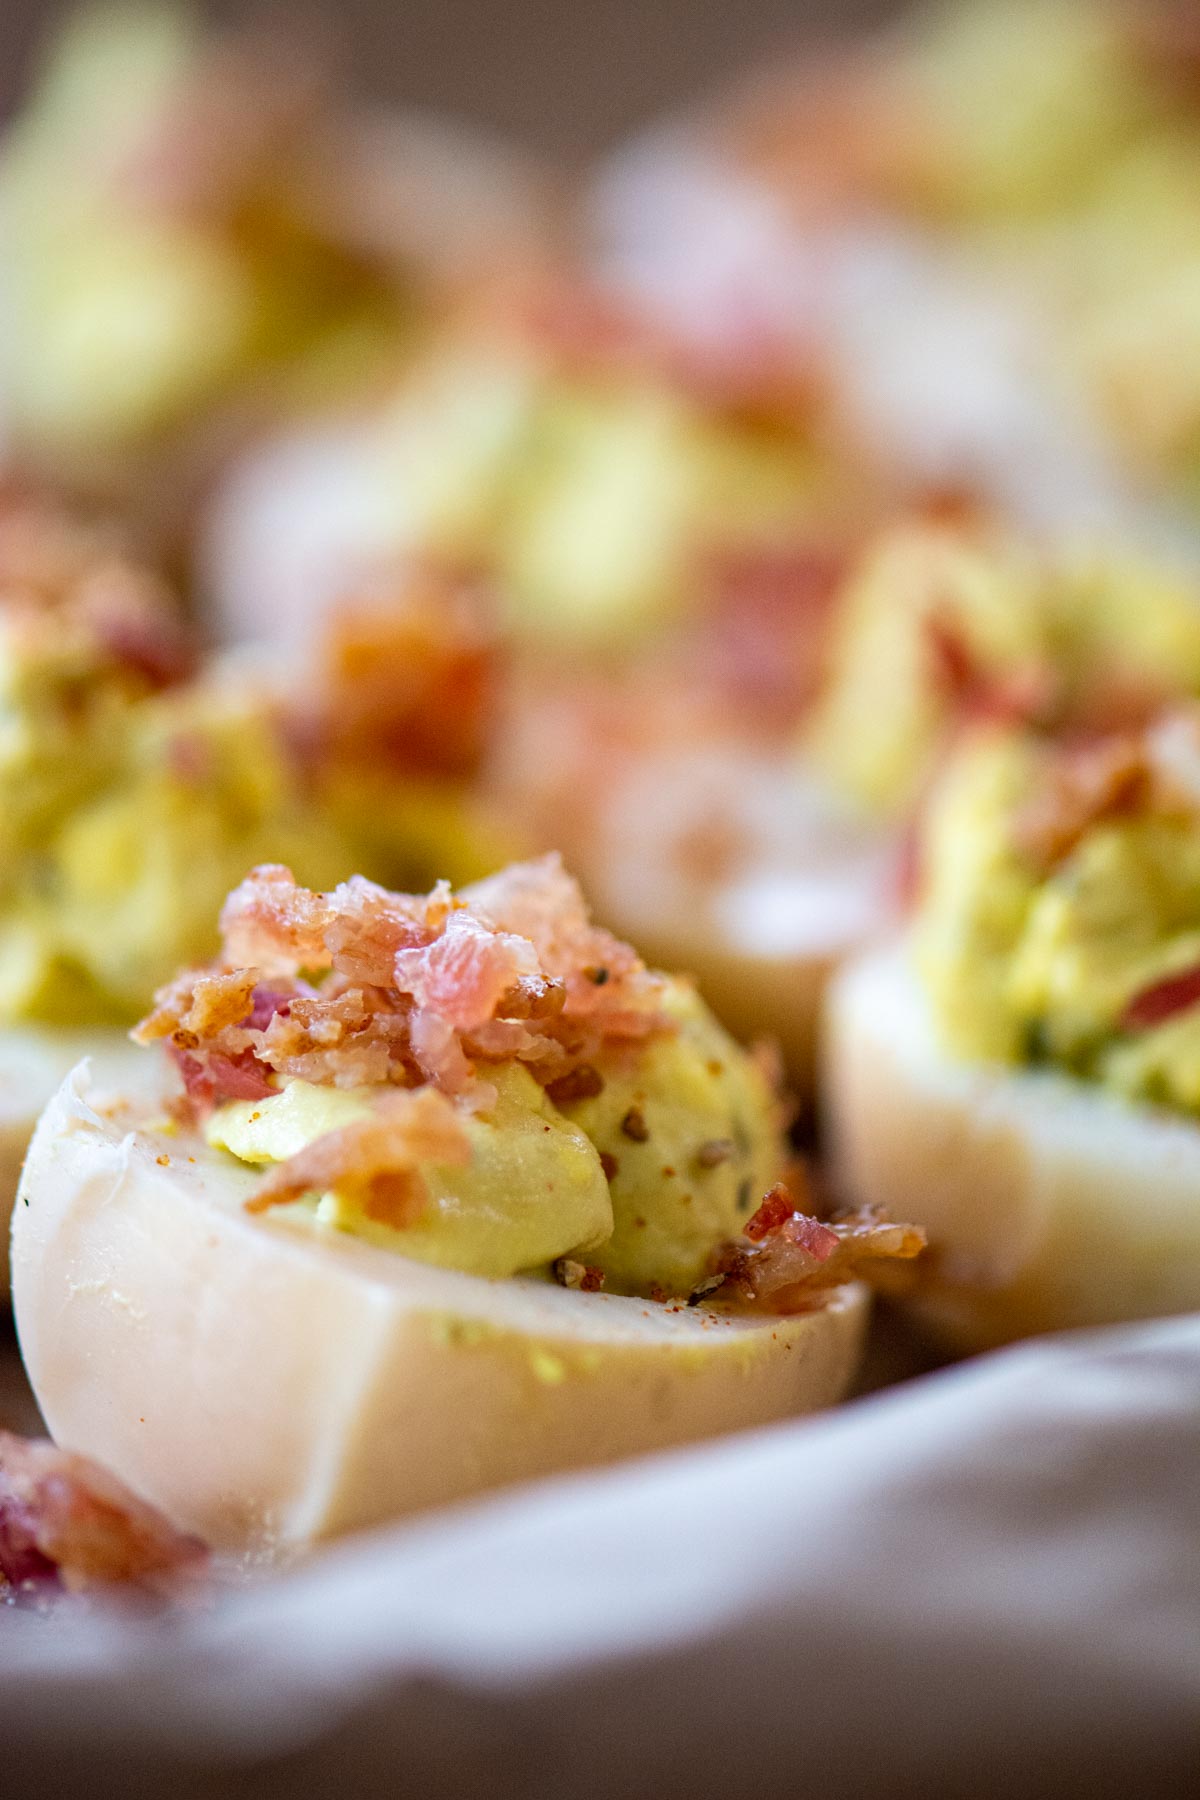 deviled egg and crumbled bacon on a sheet pan.